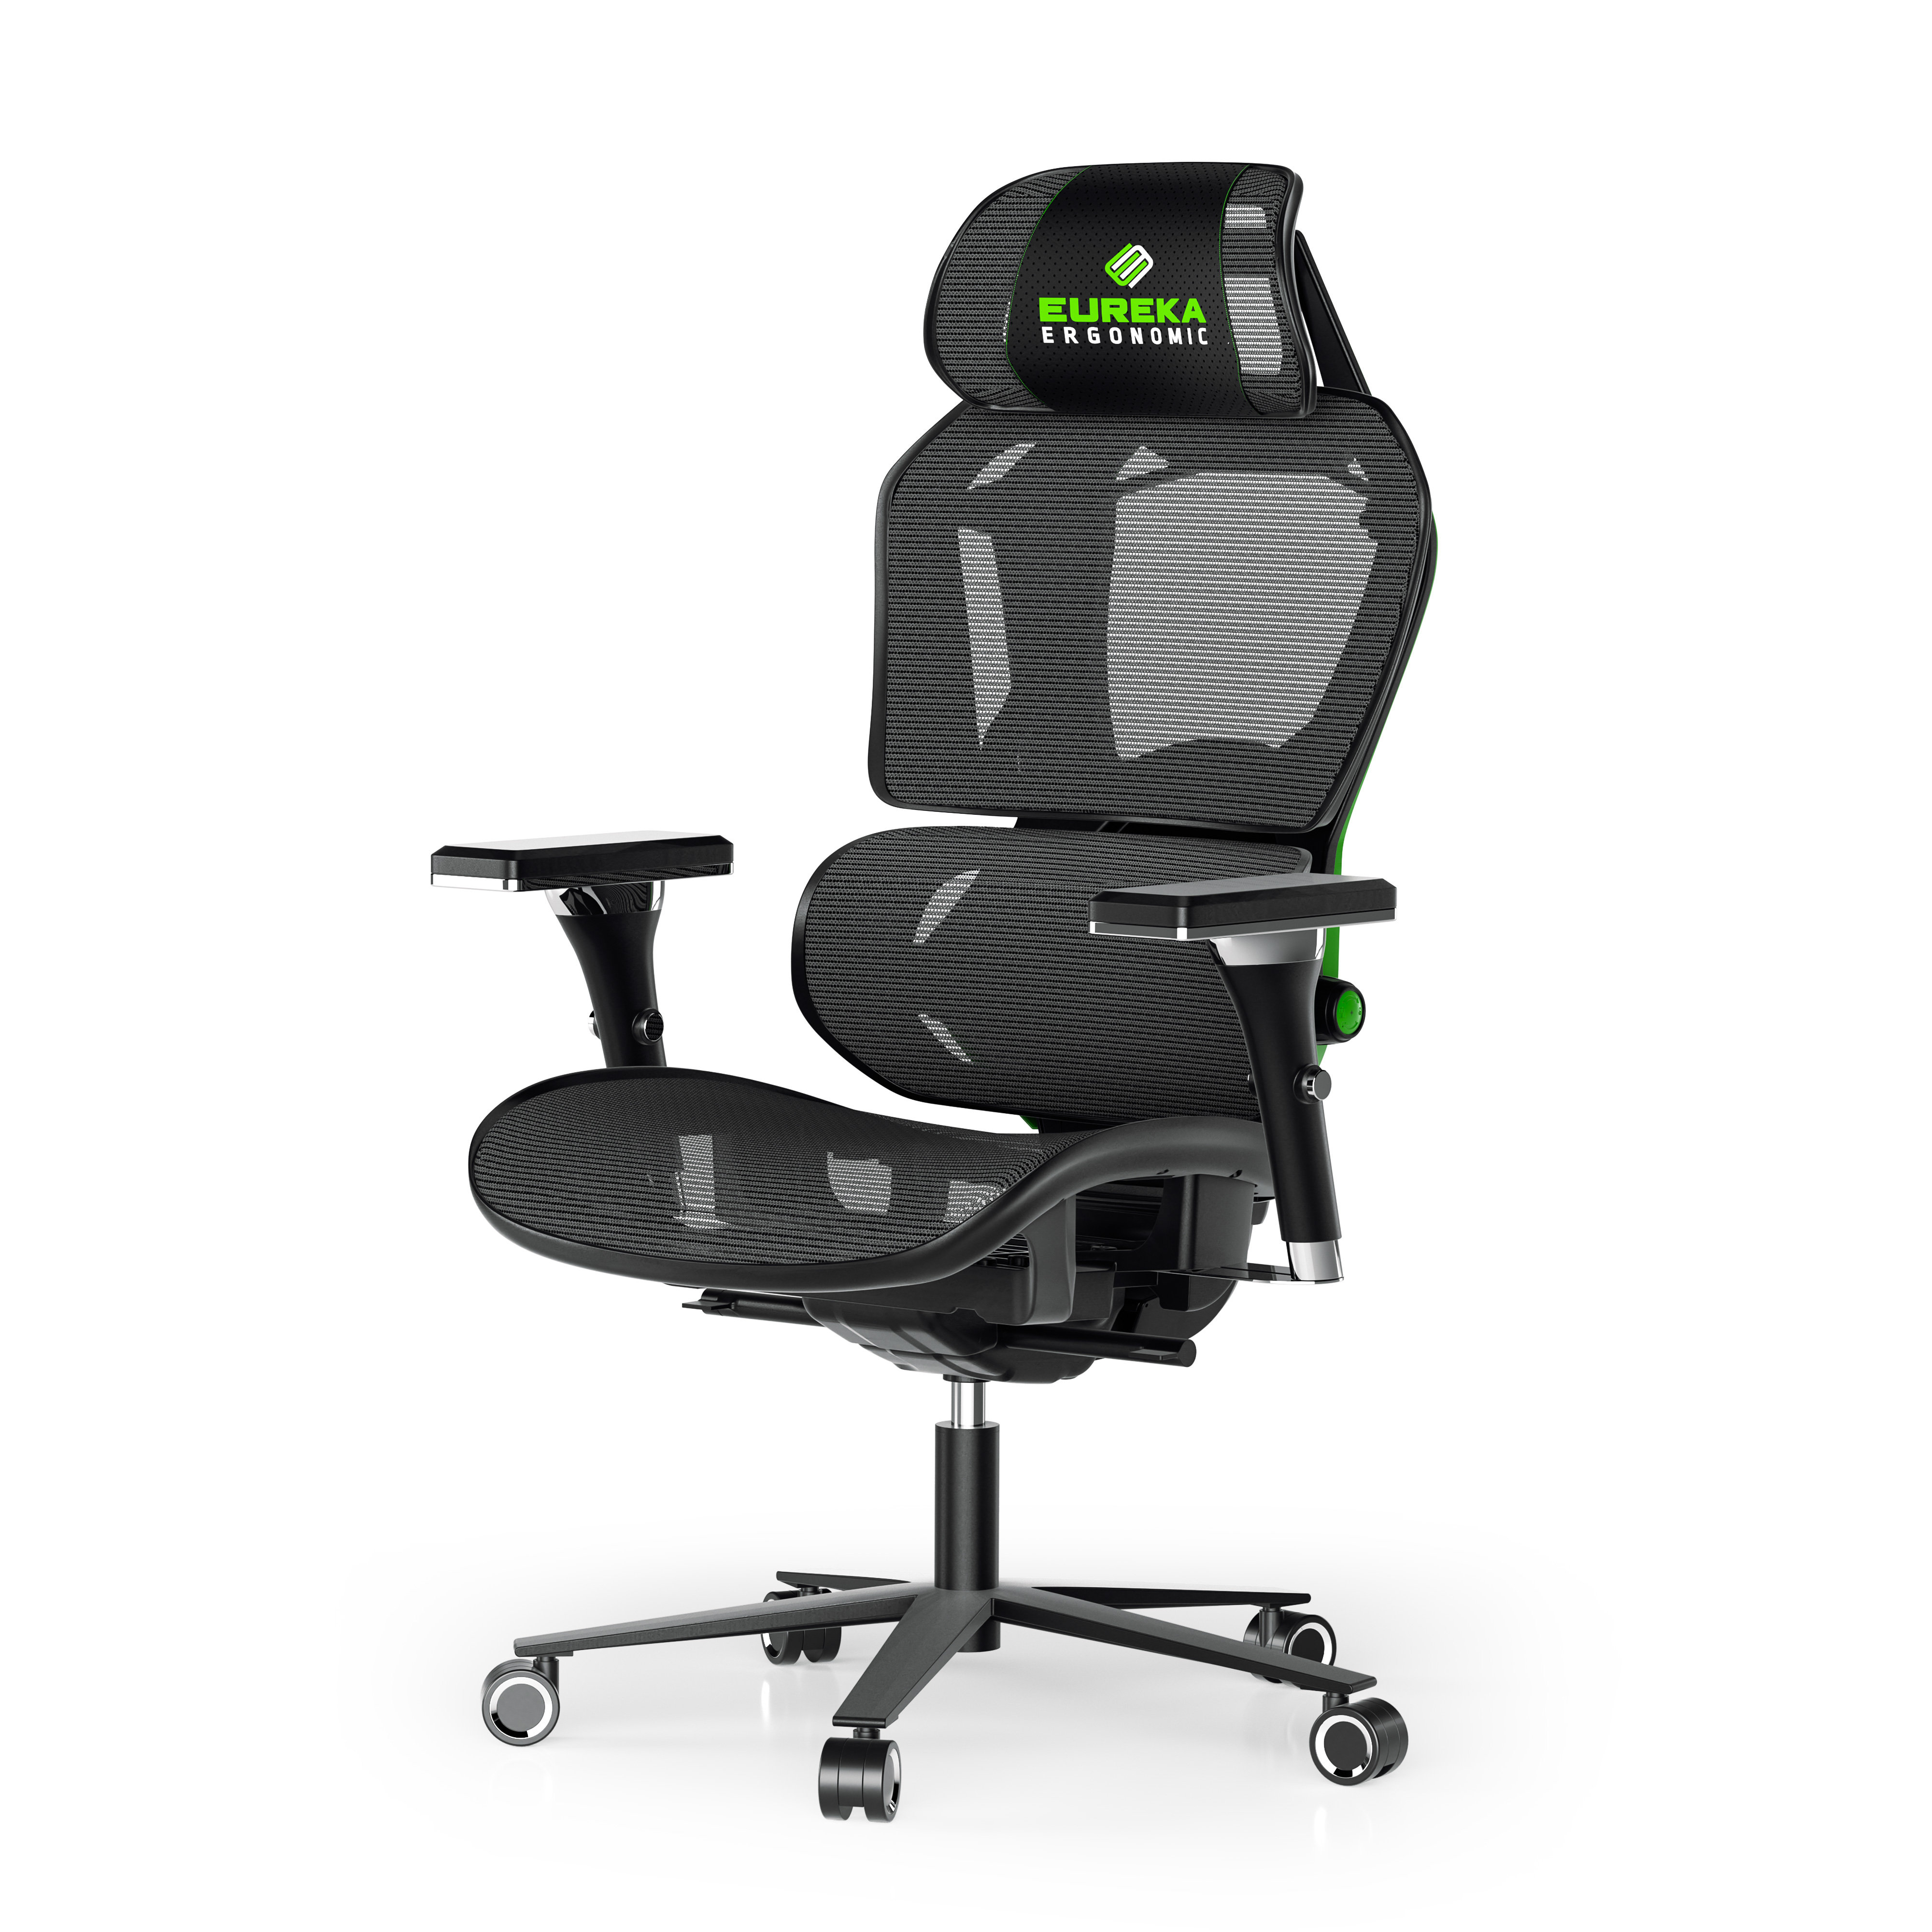 Best Office Chair, Gaming Chair with adaptive lumbar support,Python II